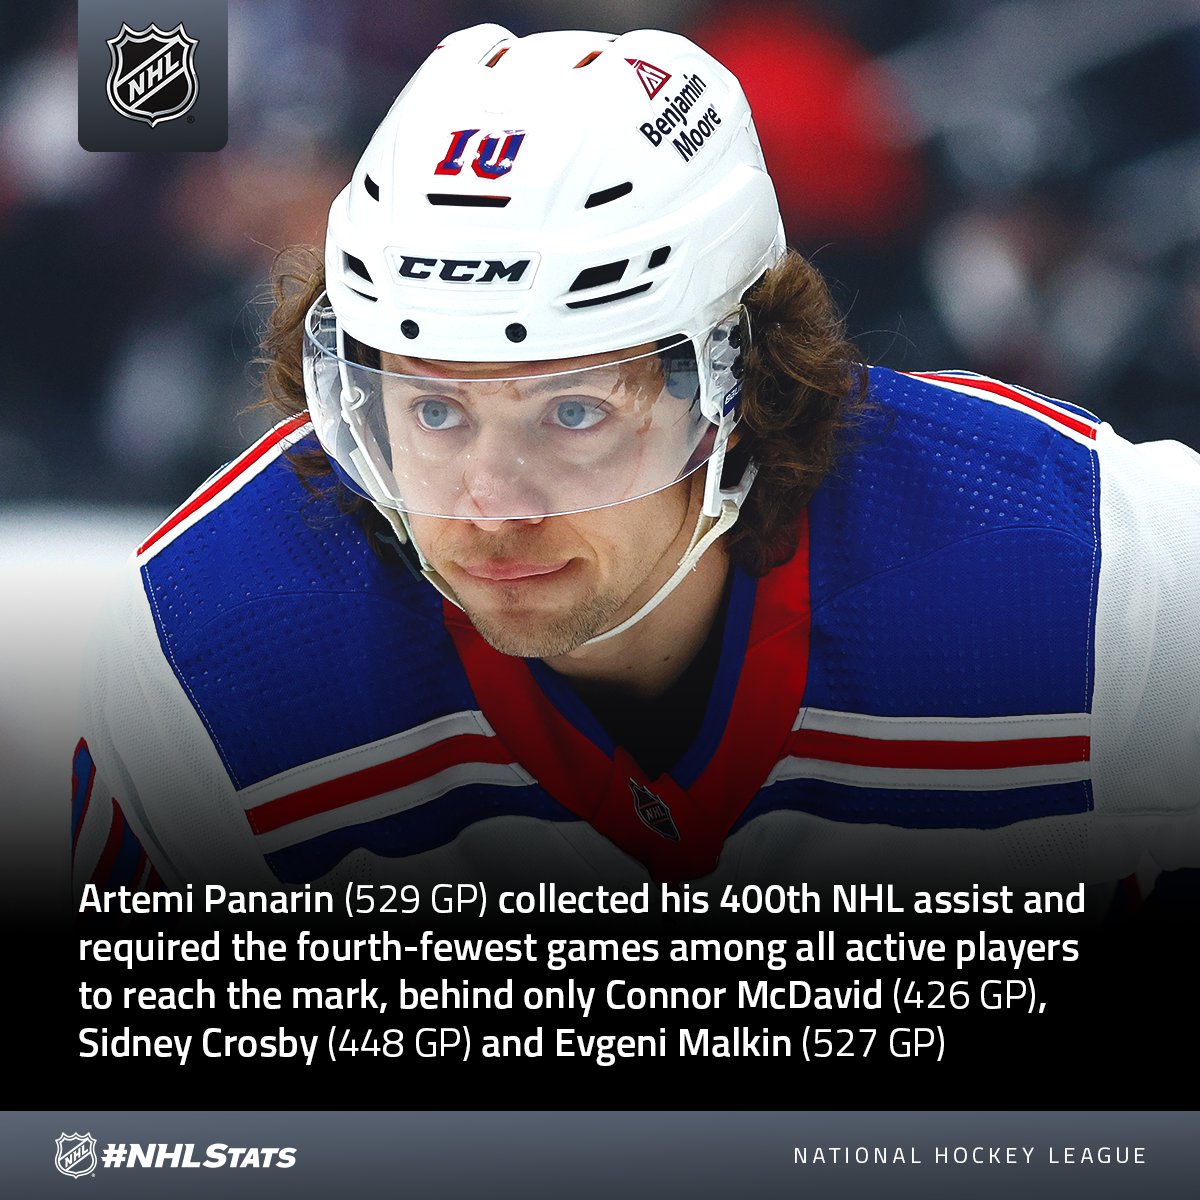 What gear does Artemi Panarin use? 